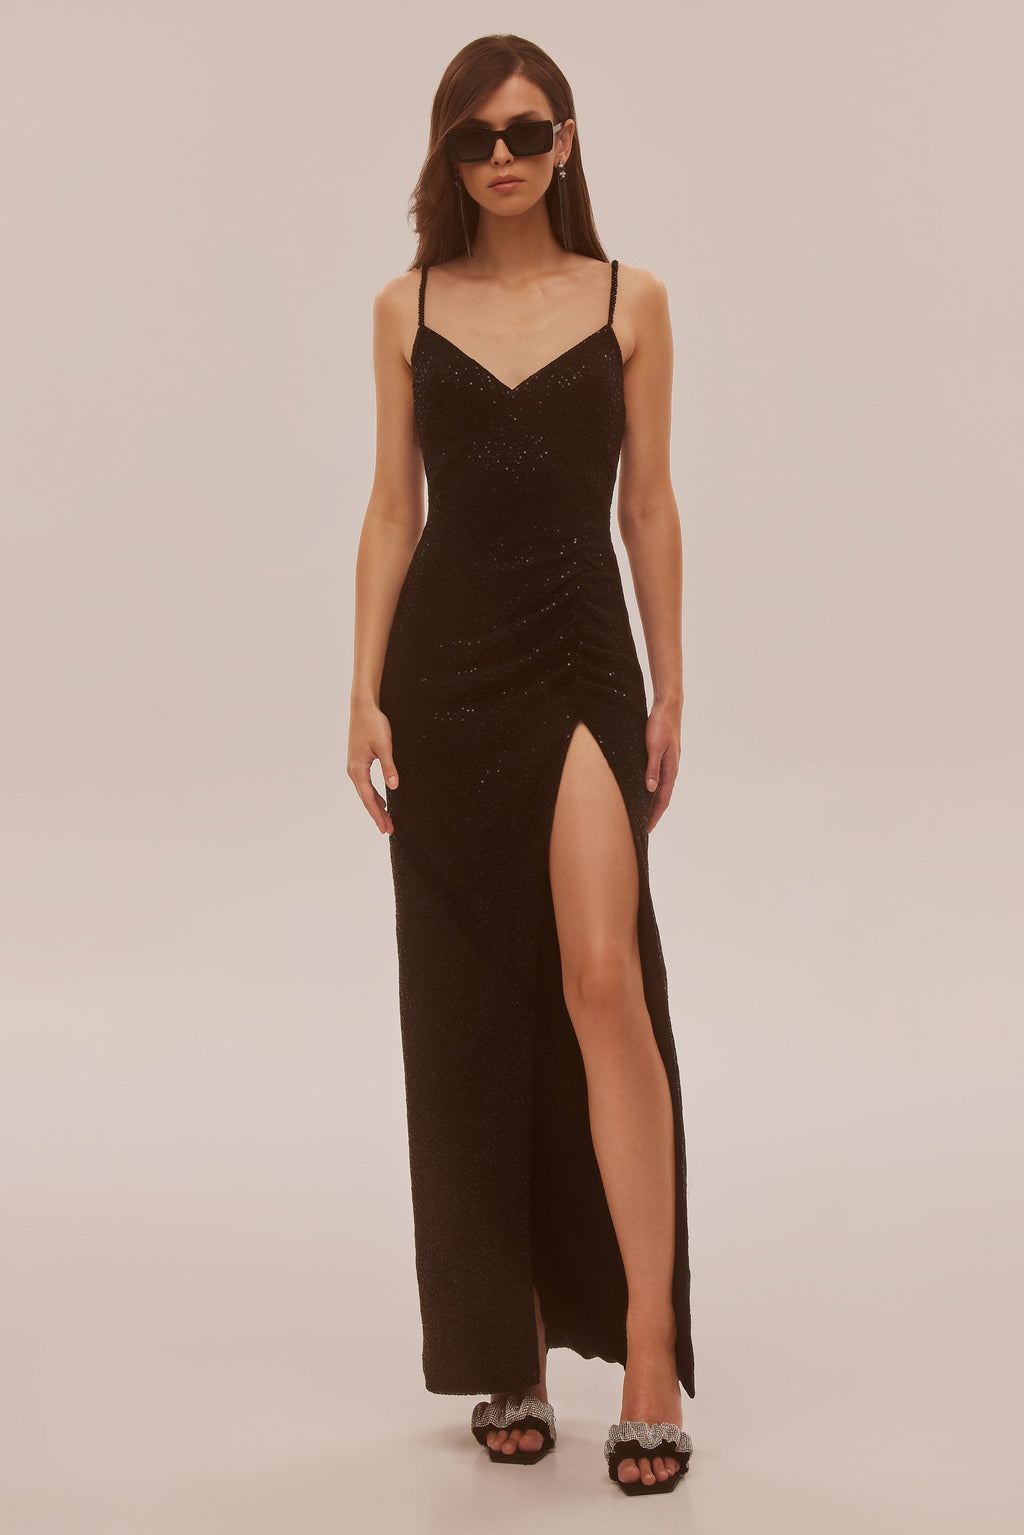 Spectacular sequined maxi gown on long spaghetti straps